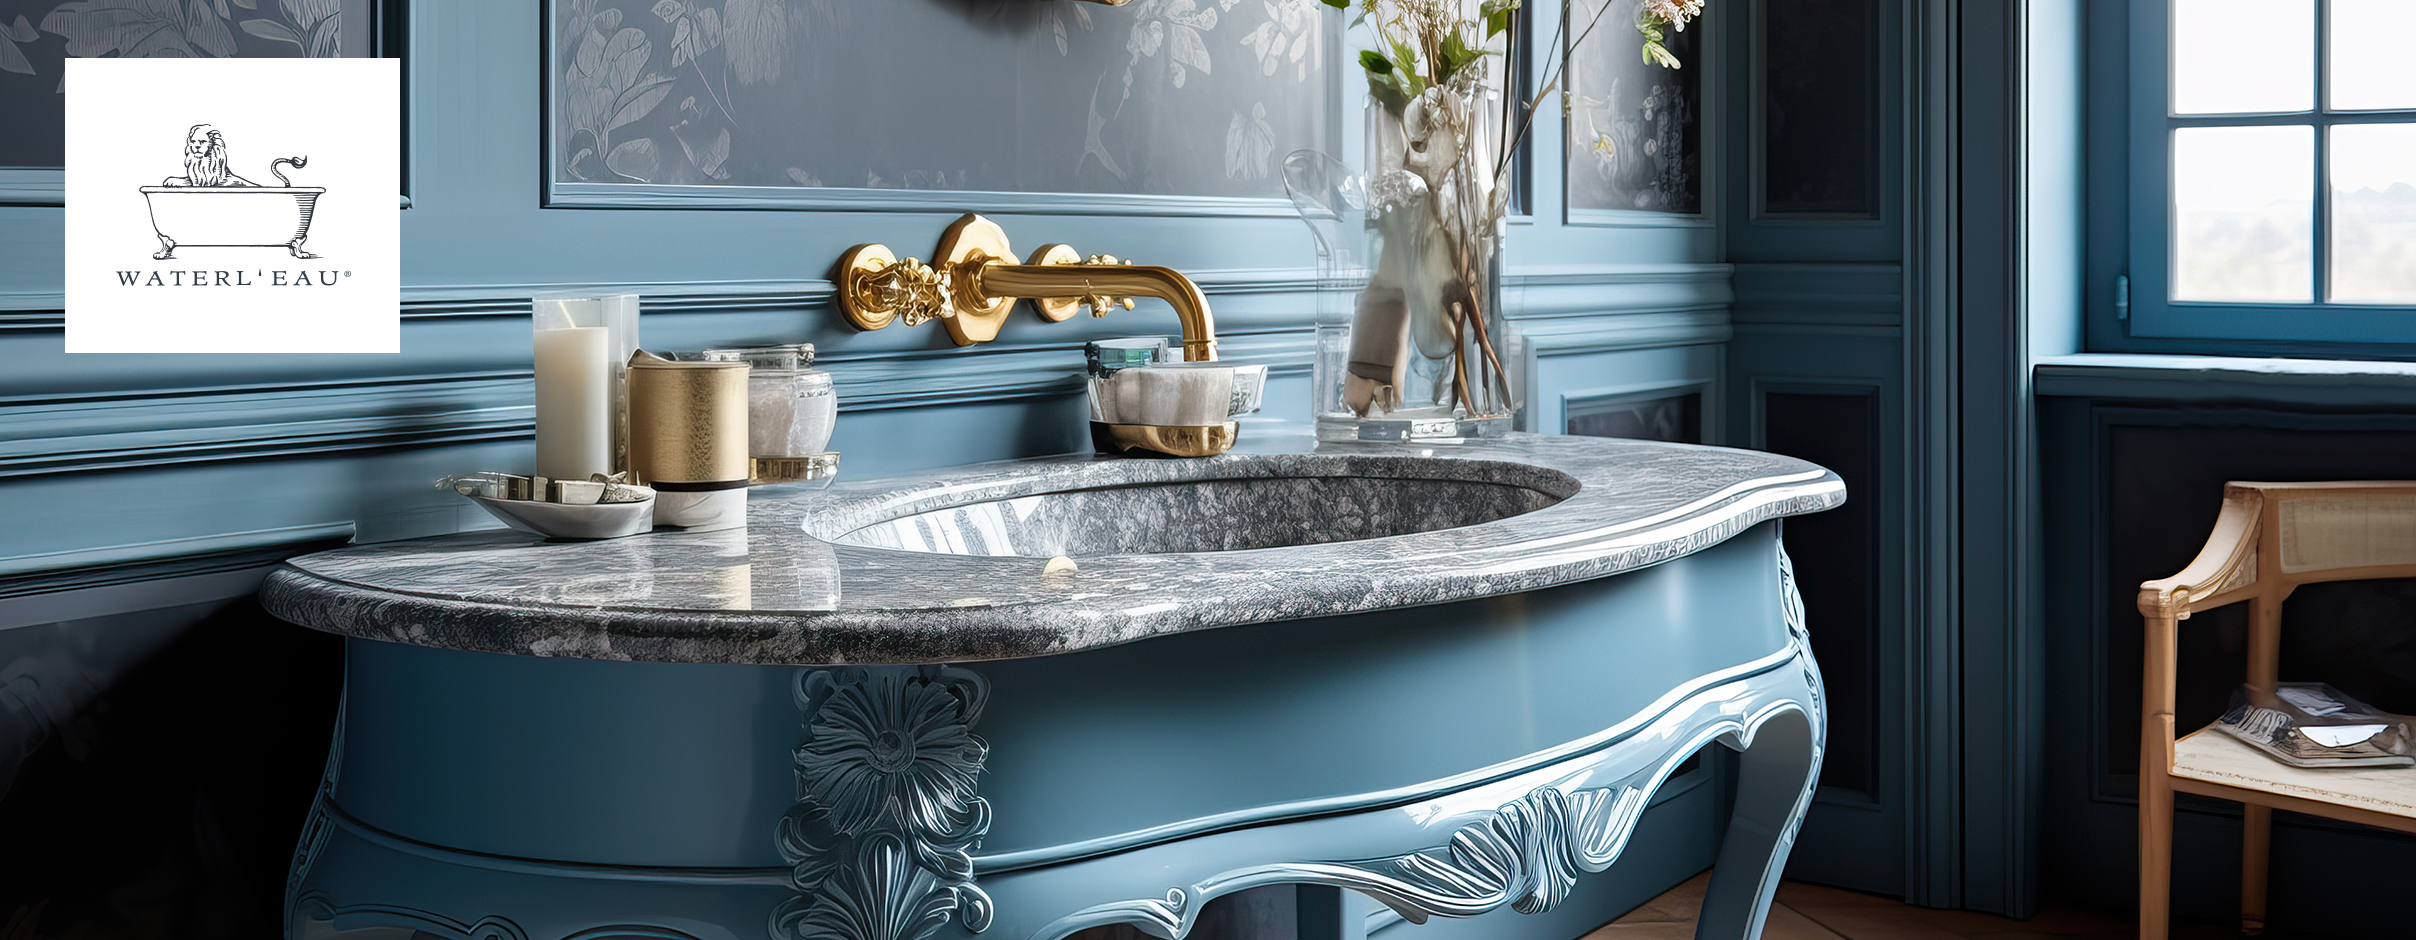 Waterl'eau old style marble sink with golden faucet